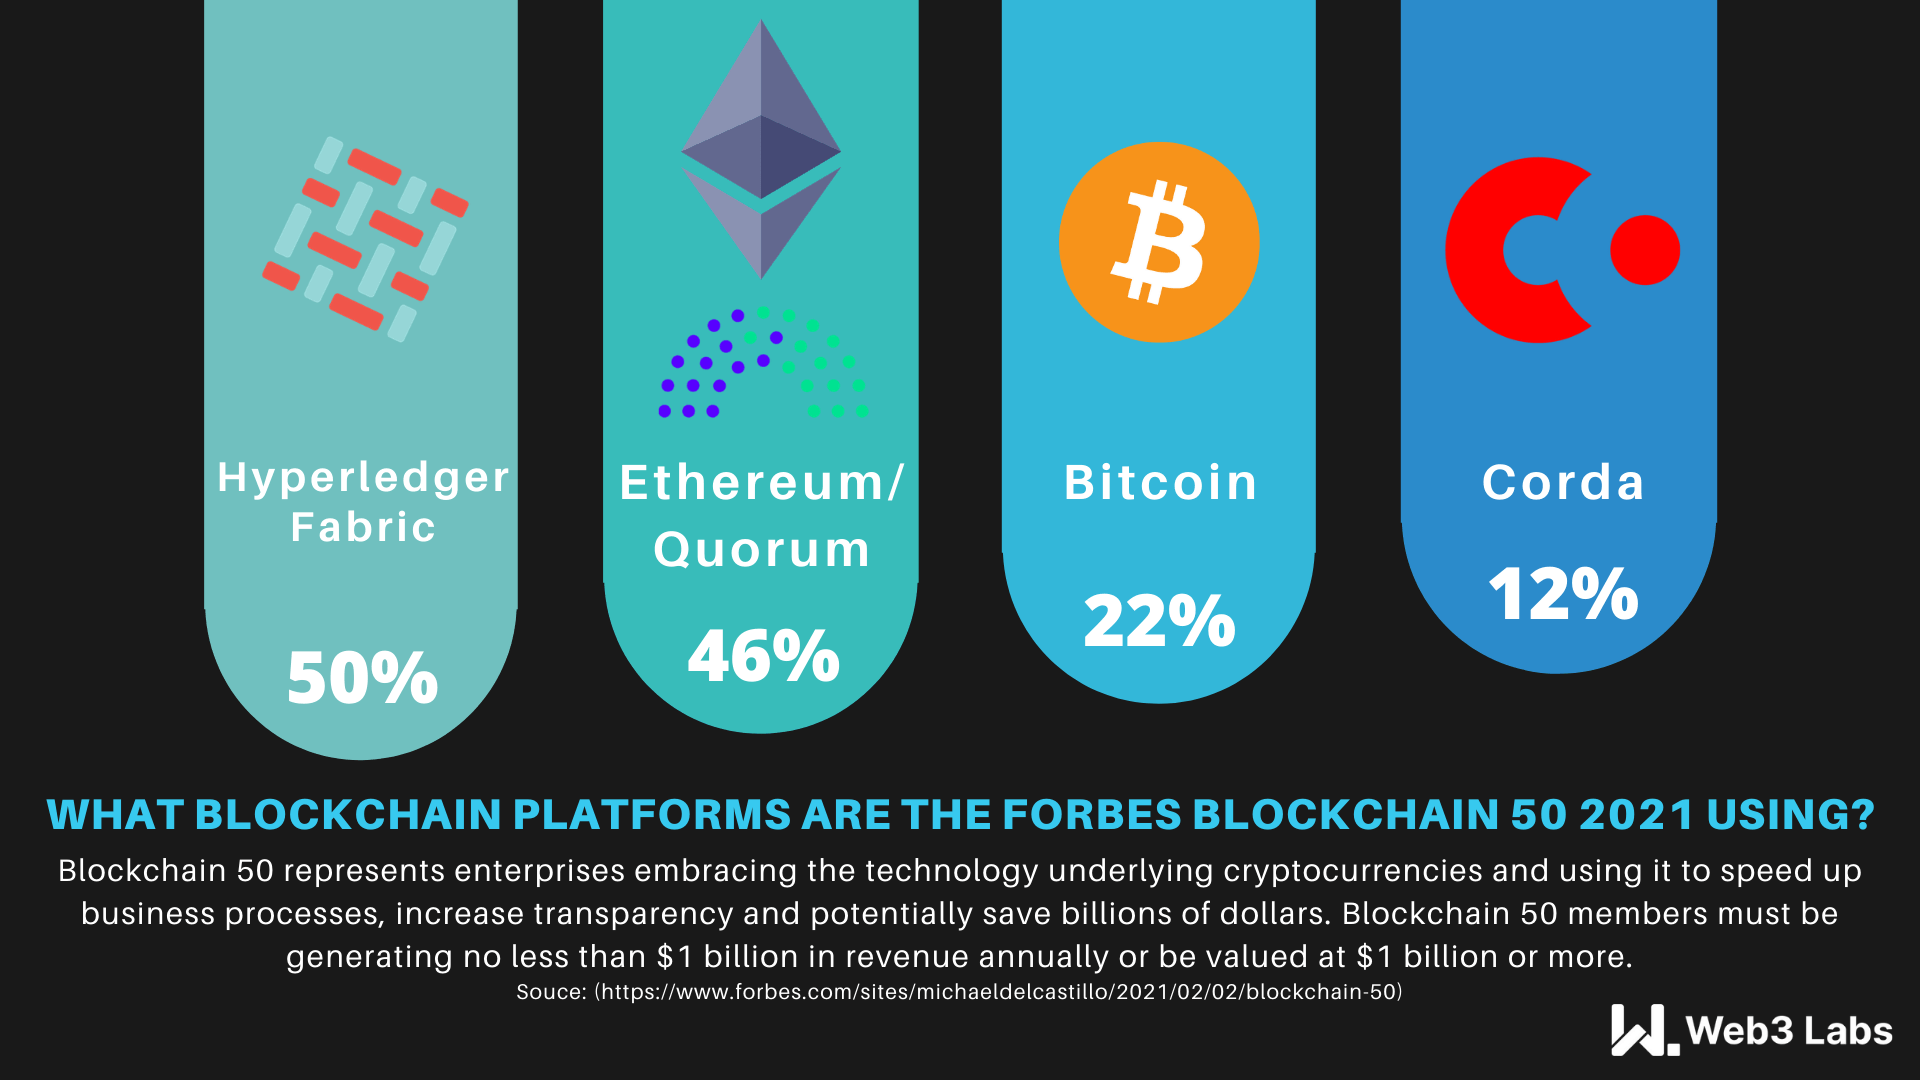 Forbes 50 infographic 2021